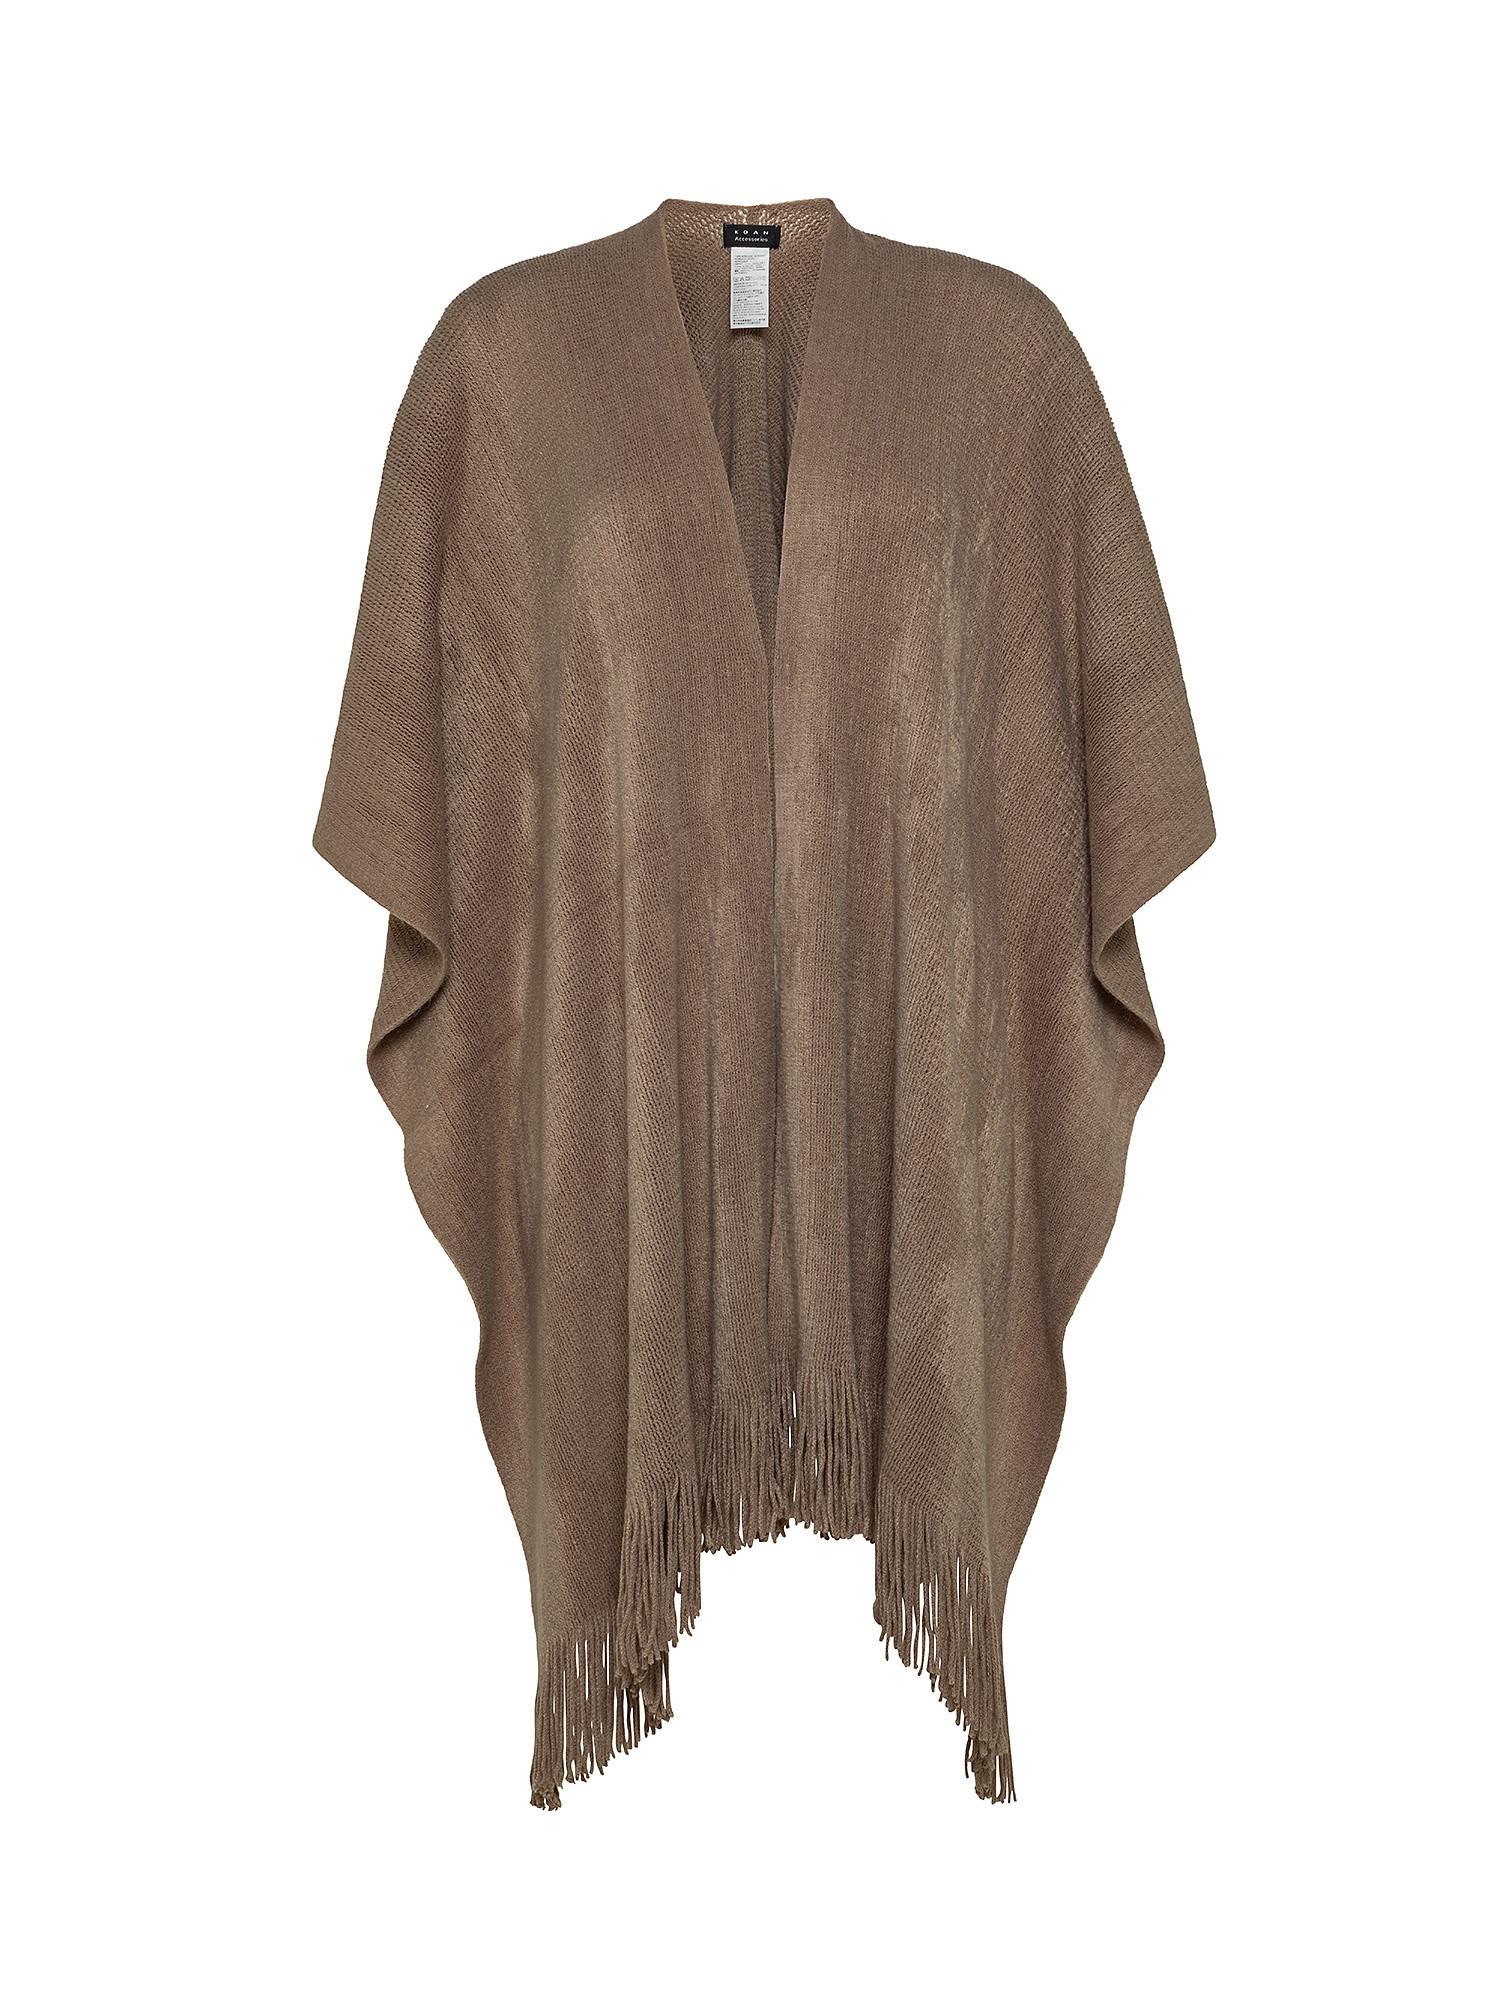 Cape with fringes, Brown, large image number 0